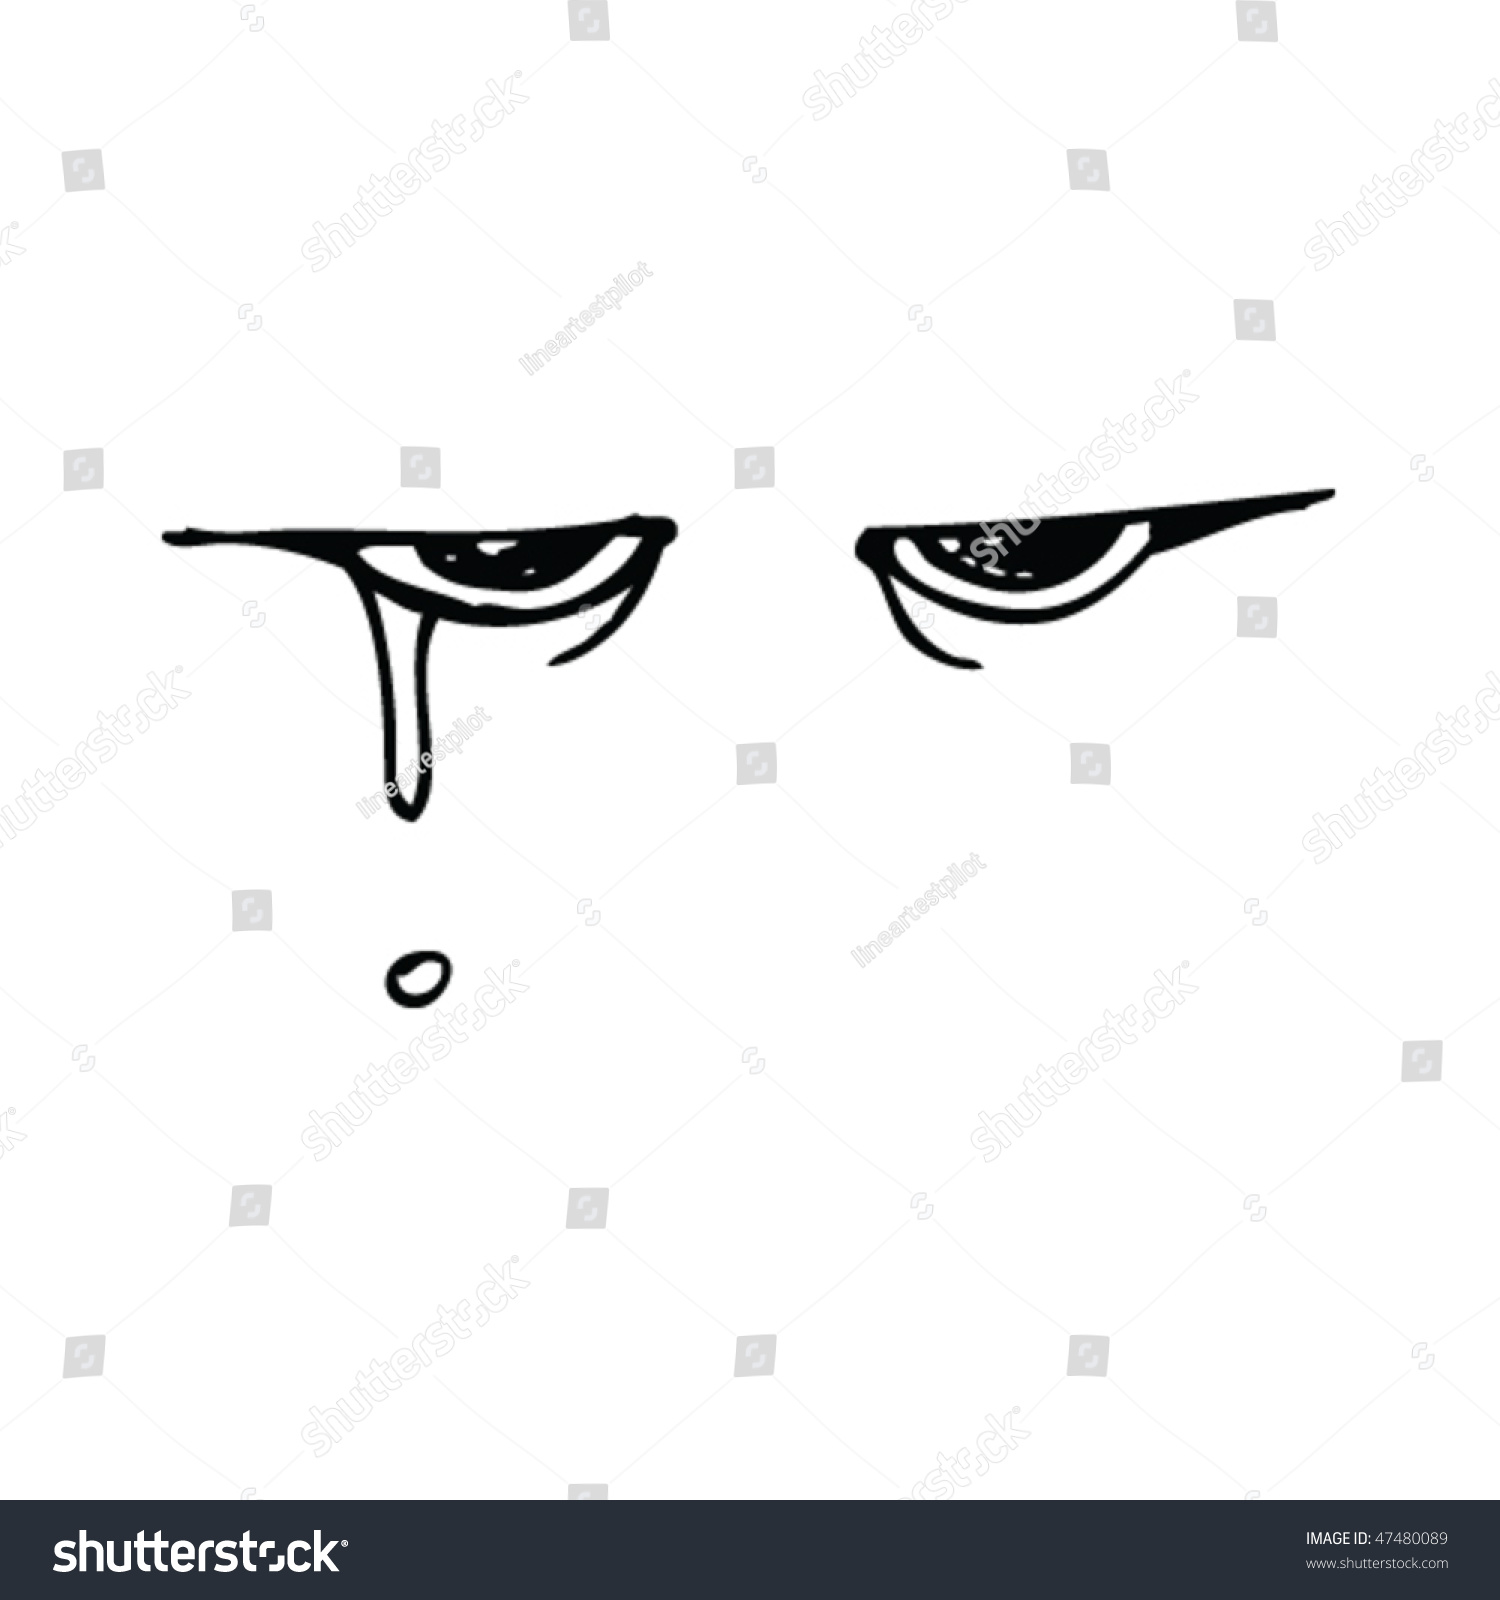 Drawing Of A Sad Expression Stock Vector Illustration 47480089 ...